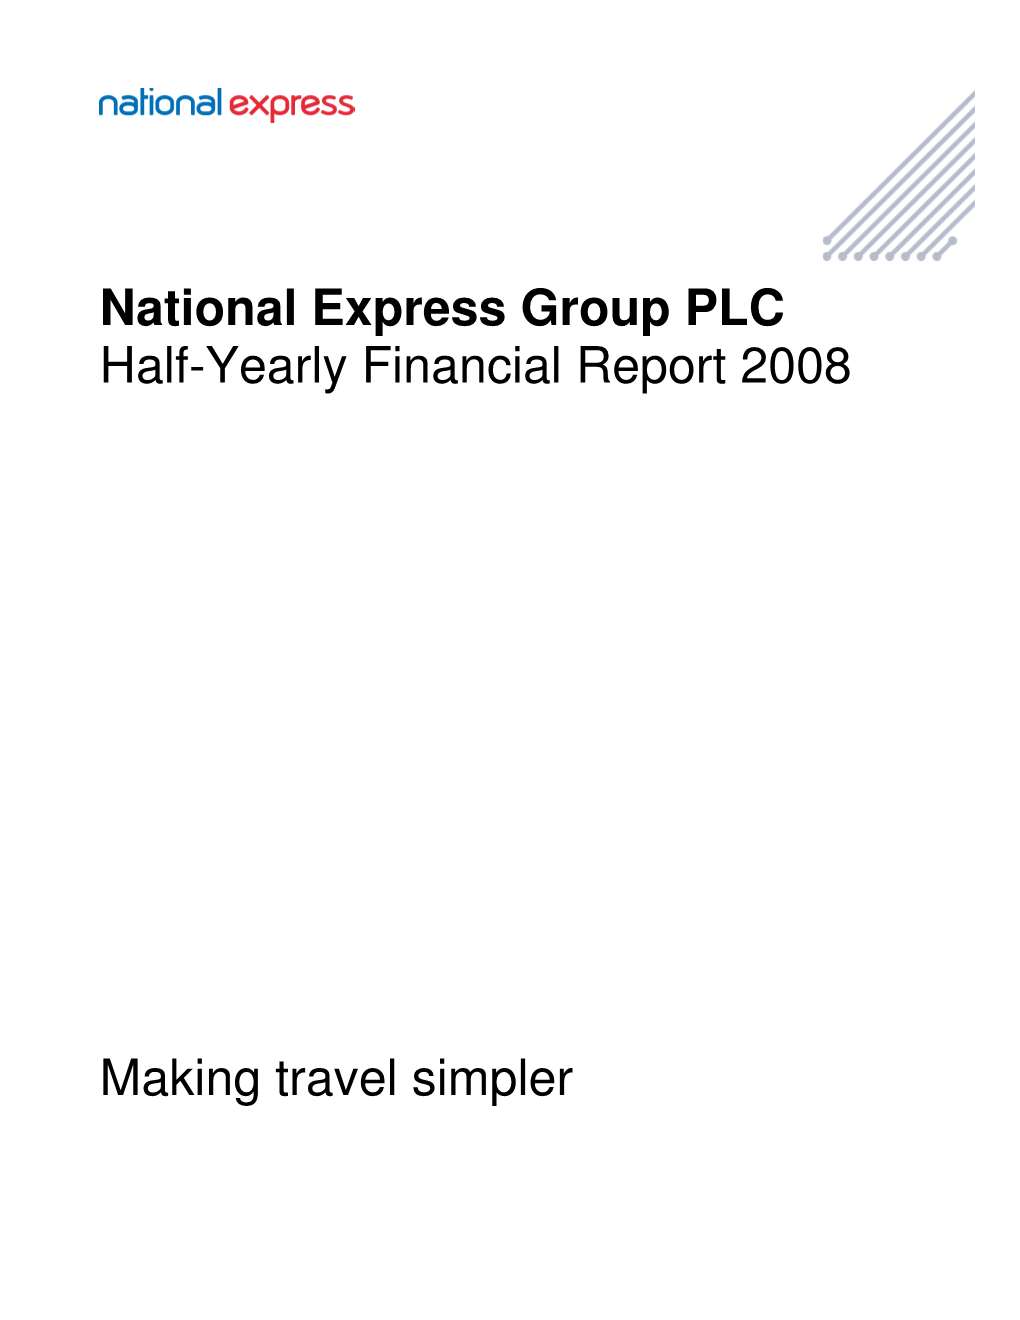 National Express Group PLC Half-Yearly Financial Report 2008